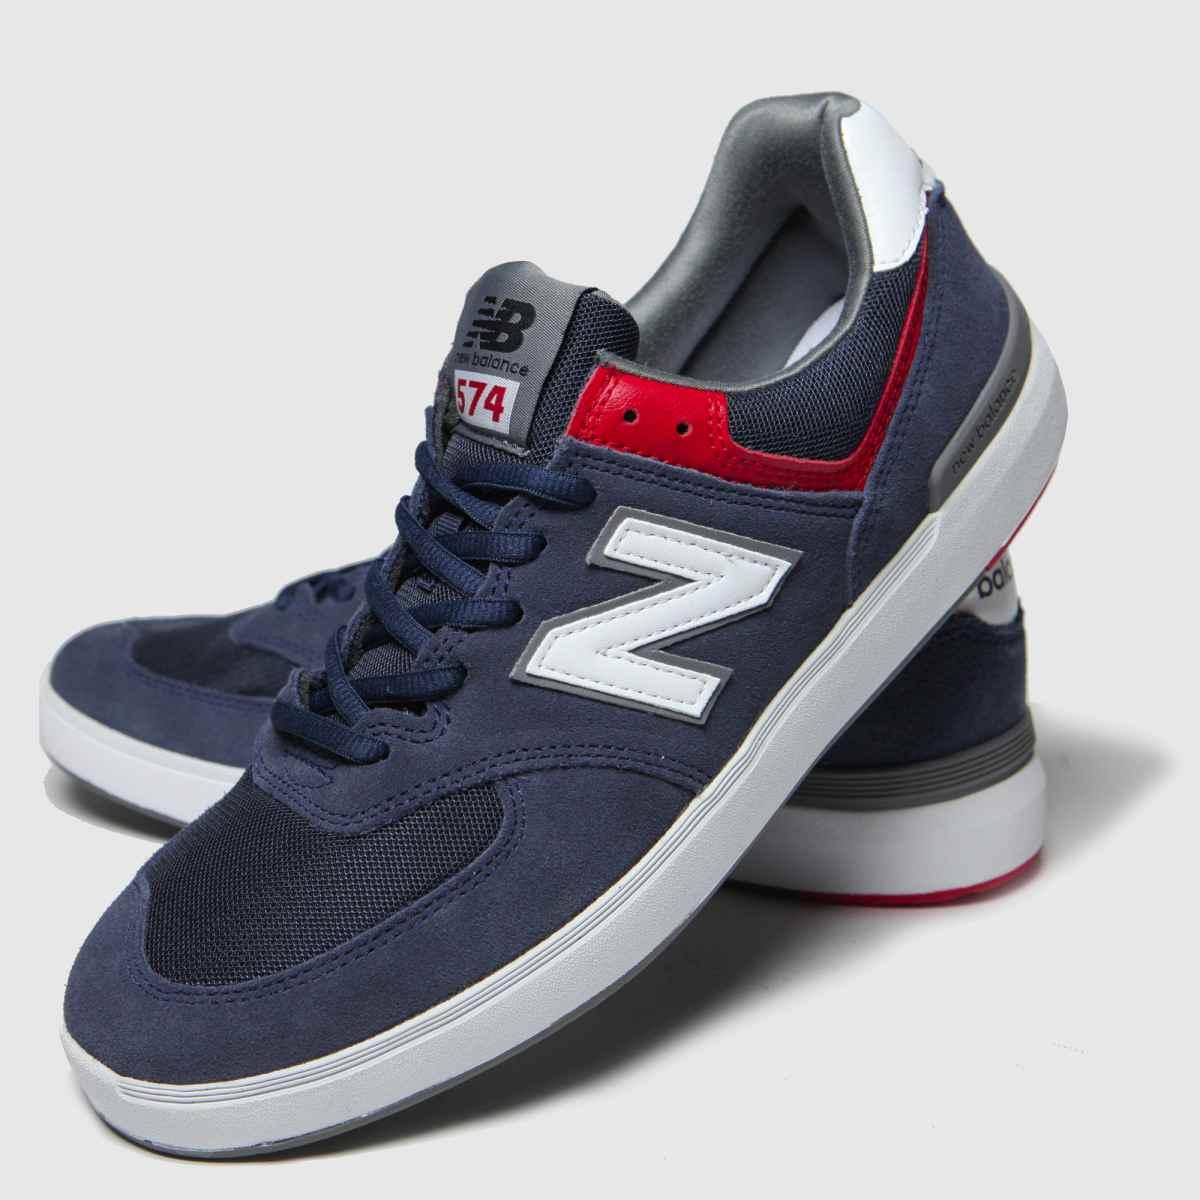 New Balance Suede Navy & White All Coasts 574 Trainers in Navy/White (Blue)  for Men - Lyst